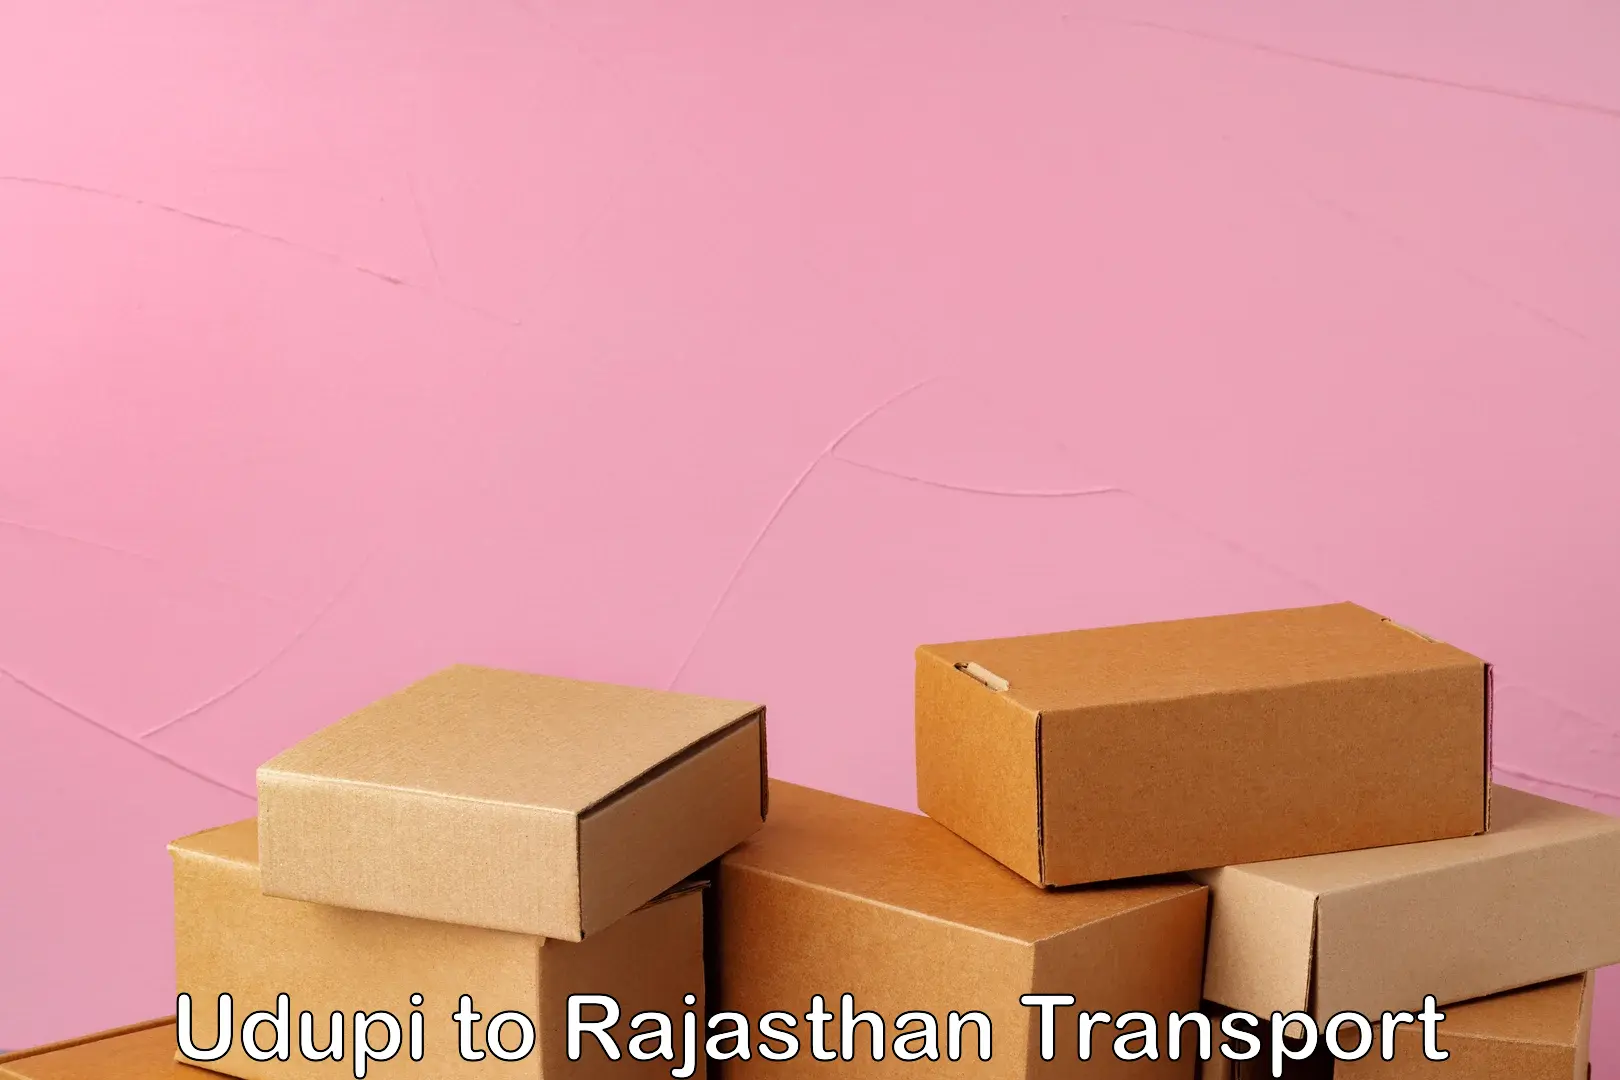 Truck transport companies in India in Udupi to Rajasthan